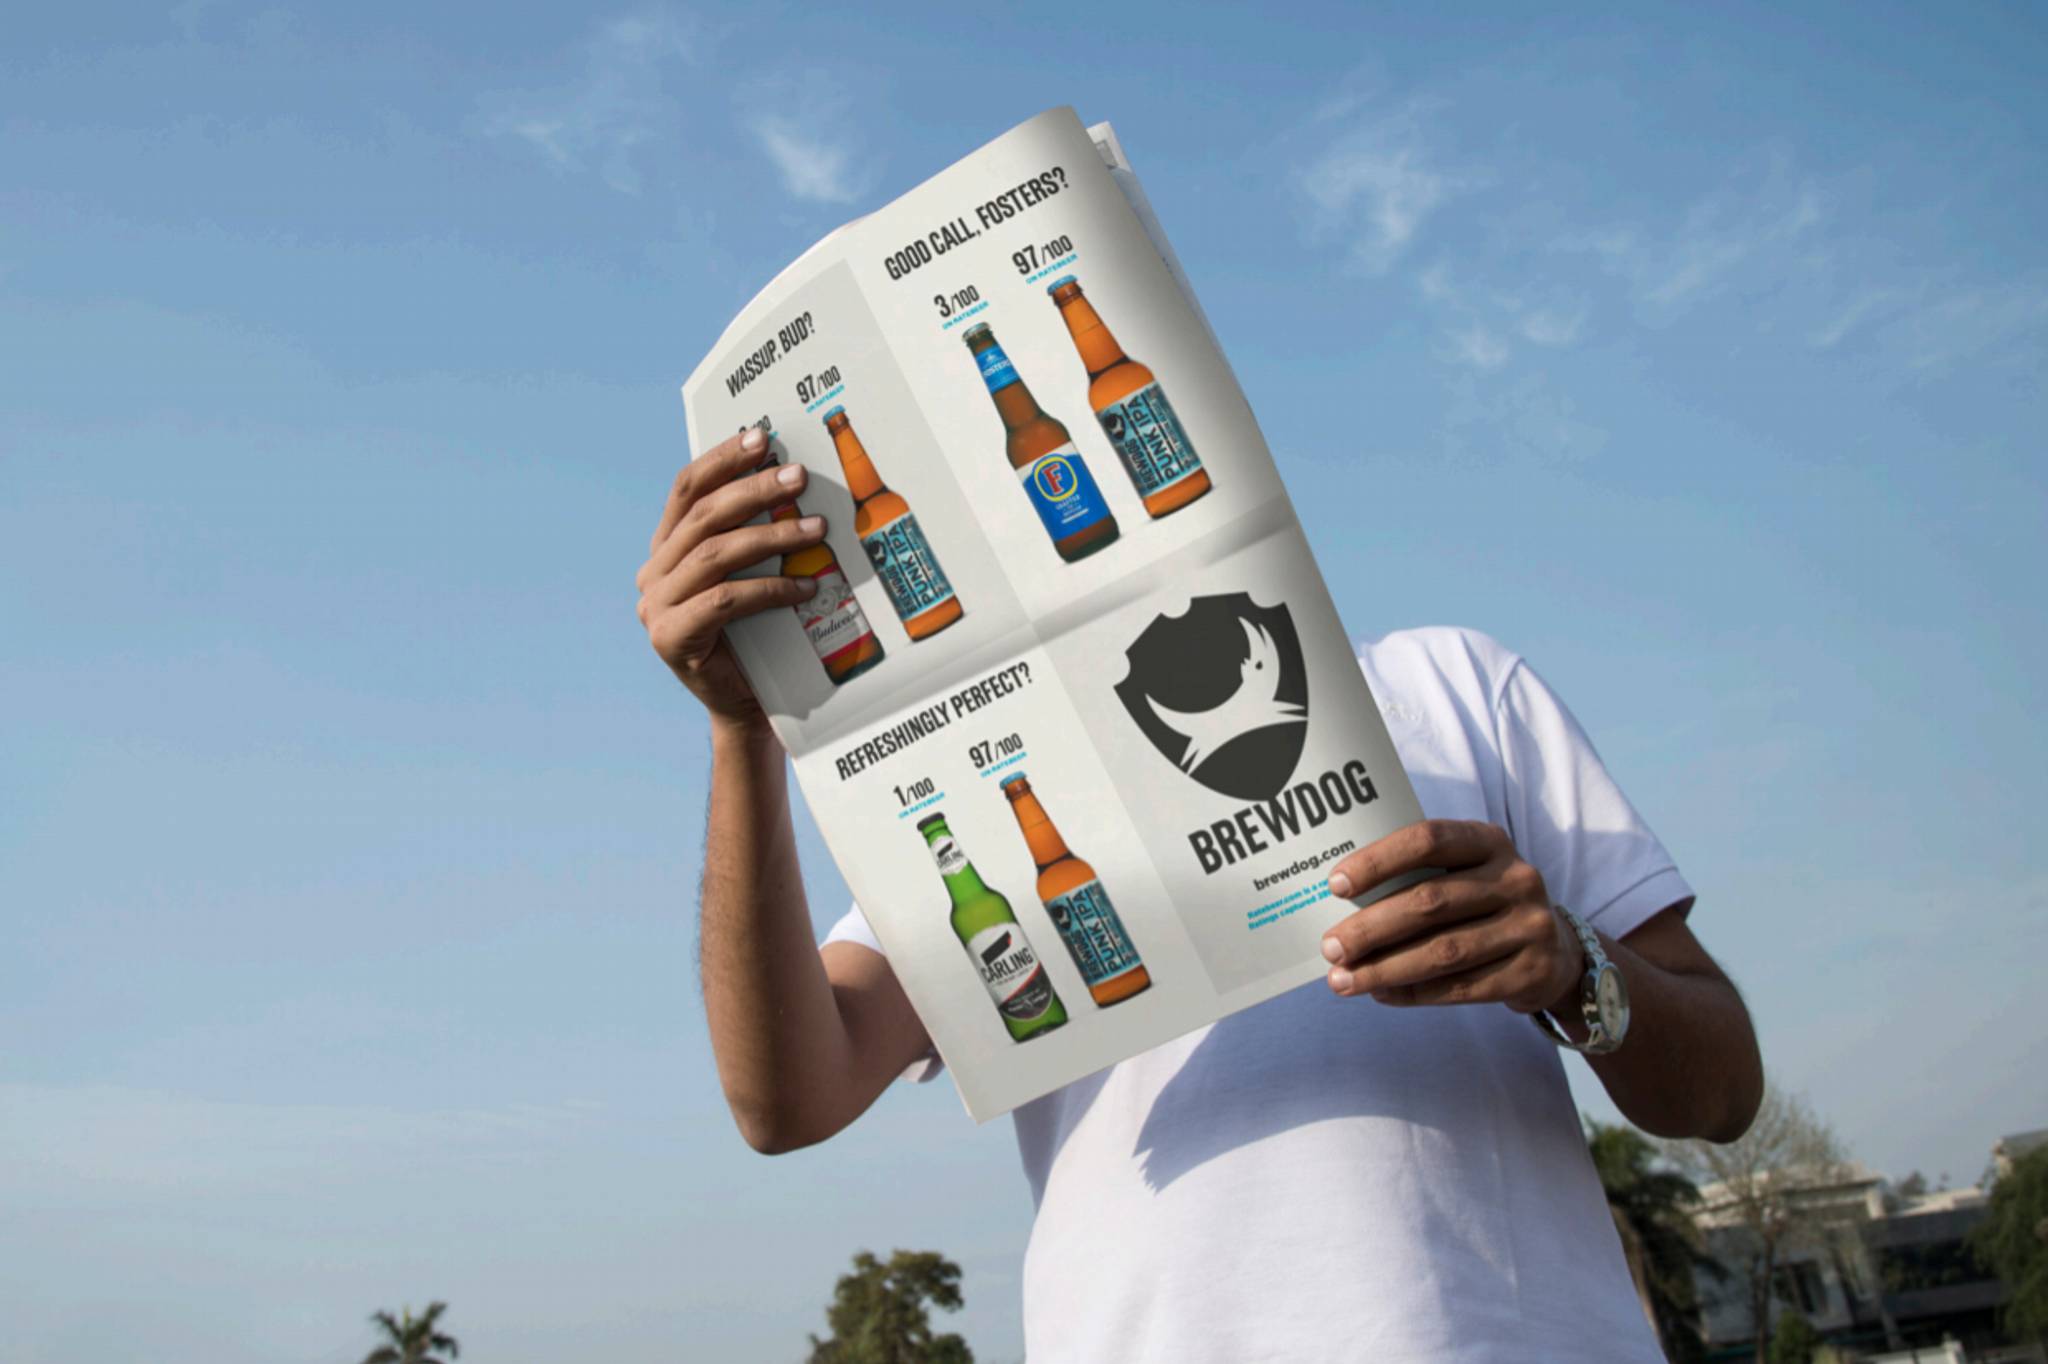 Brewdog ad reminds people of craft beer's superiority